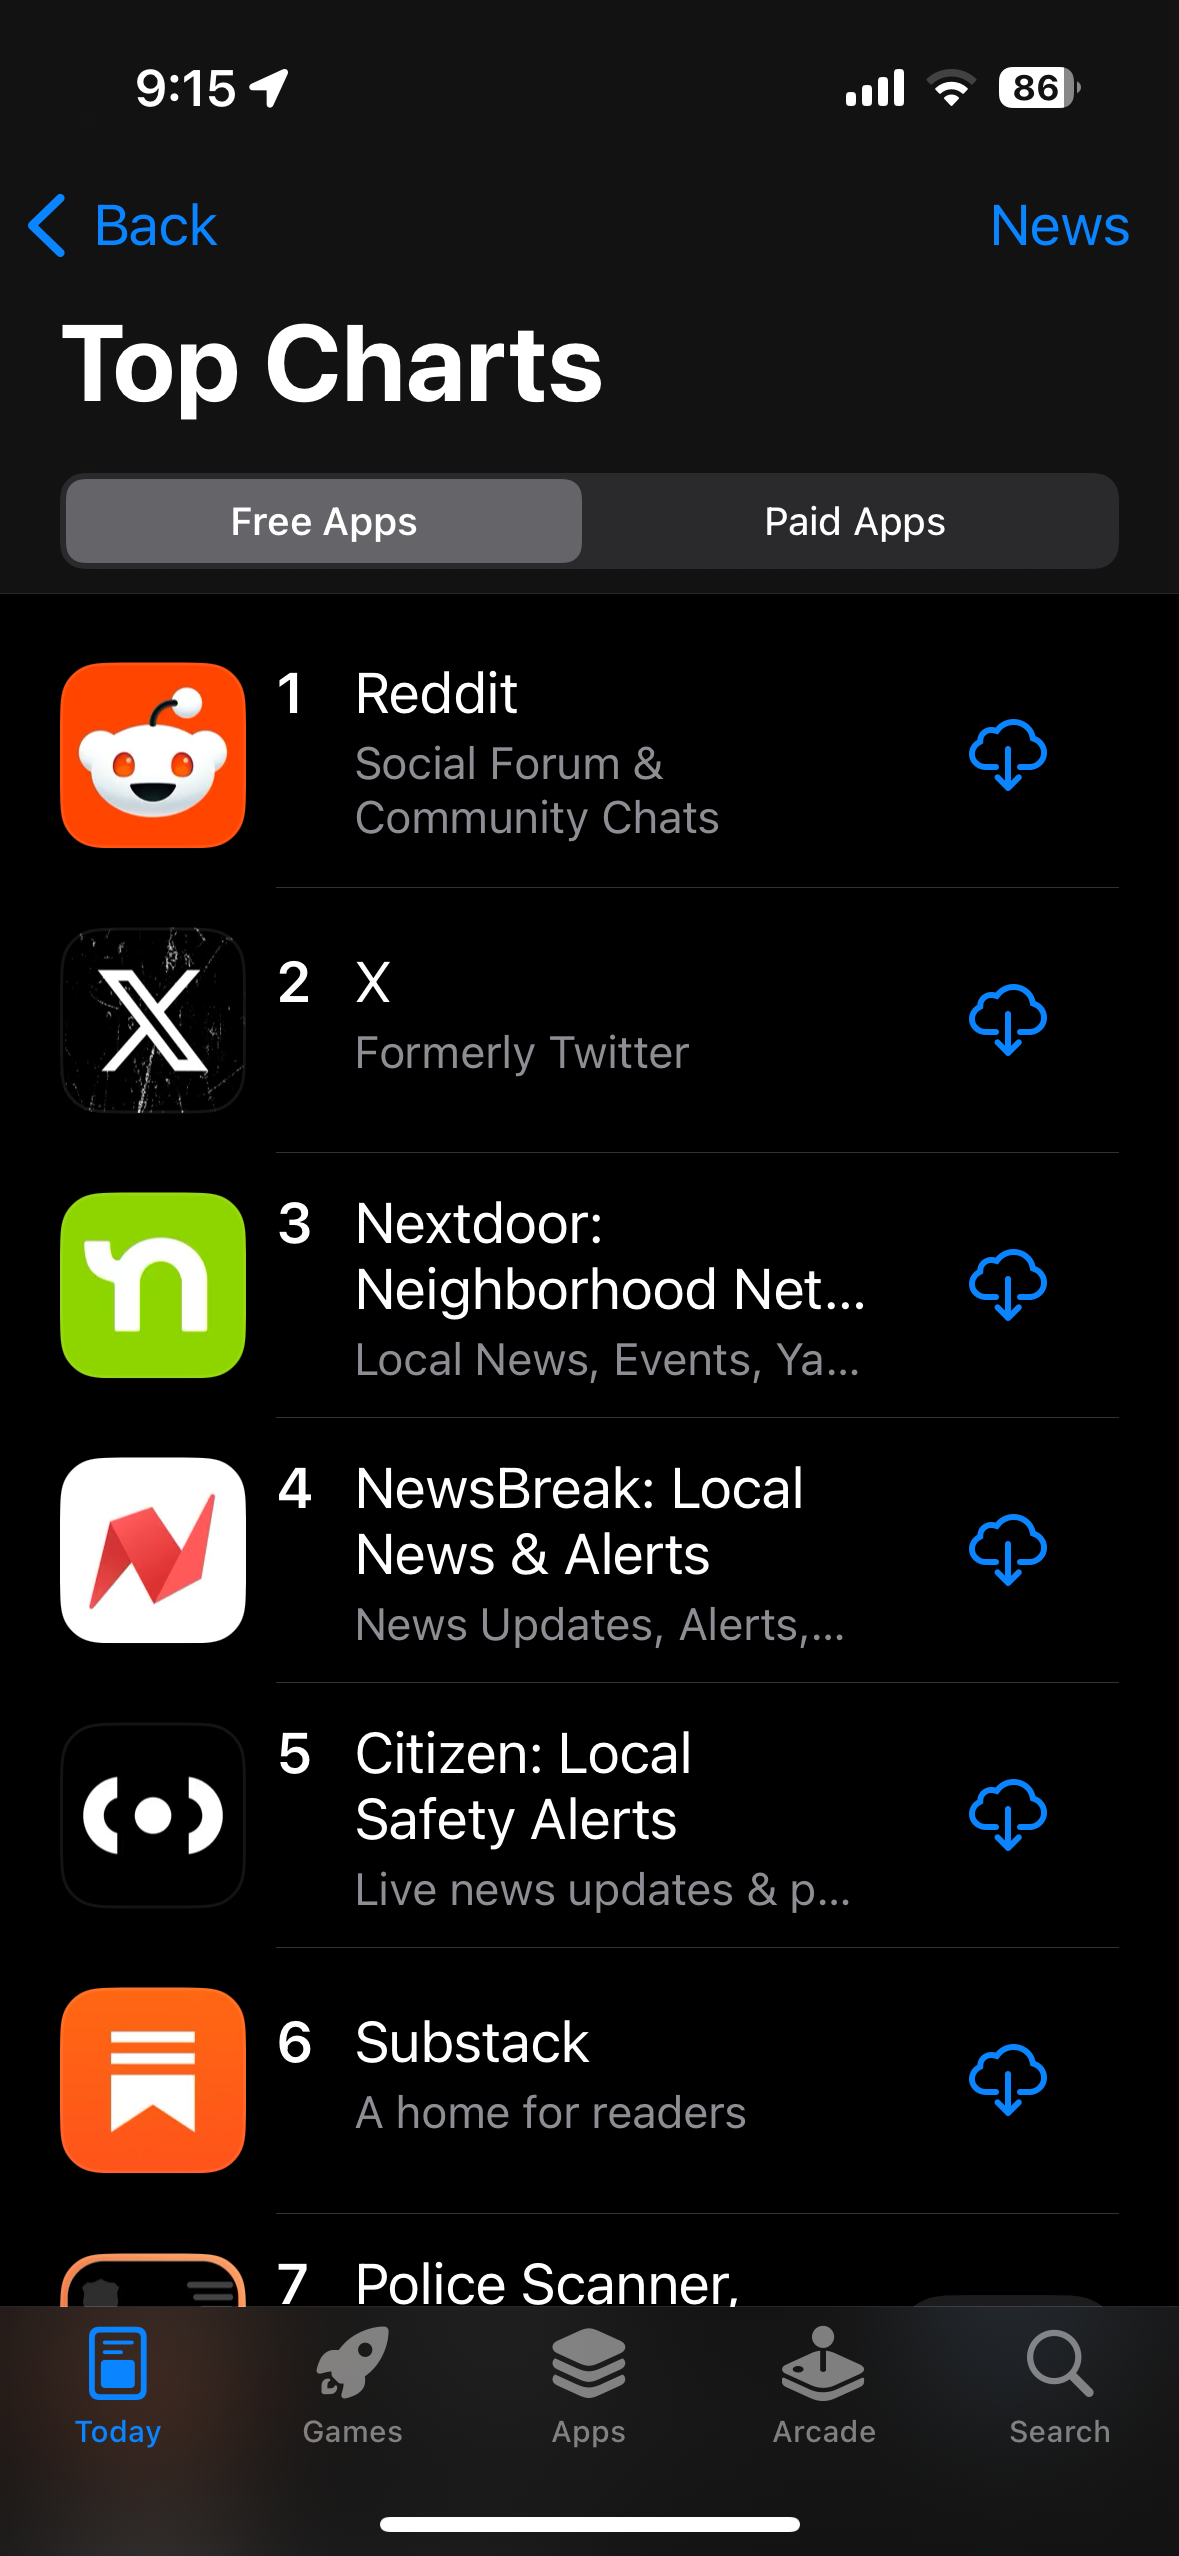 The image shows a screenshot from an iPhone of the iOS App Store displaying the 'Top Charts' section for free apps. The top seven apps are listed: 1. Reddit - Social Forum & Community Chats, 2. X - Formerly Twitter, 3. Nextdoor: Neighborhood Net..., 4. NewsBreak: Local News & Alerts, 5. Citizen: Local Safety Alerts, 6. Substack - A home for readers, and 7. Police Scanner. Icons for 'Today', 'Games', 'Apps', 'Arcade', and 'Search' are at the bottom of the screen. The device's status bar indicates it's 9:15 with Wi-Fi and battery level at 86%, and a 'News' widget is visible in the top right corner.